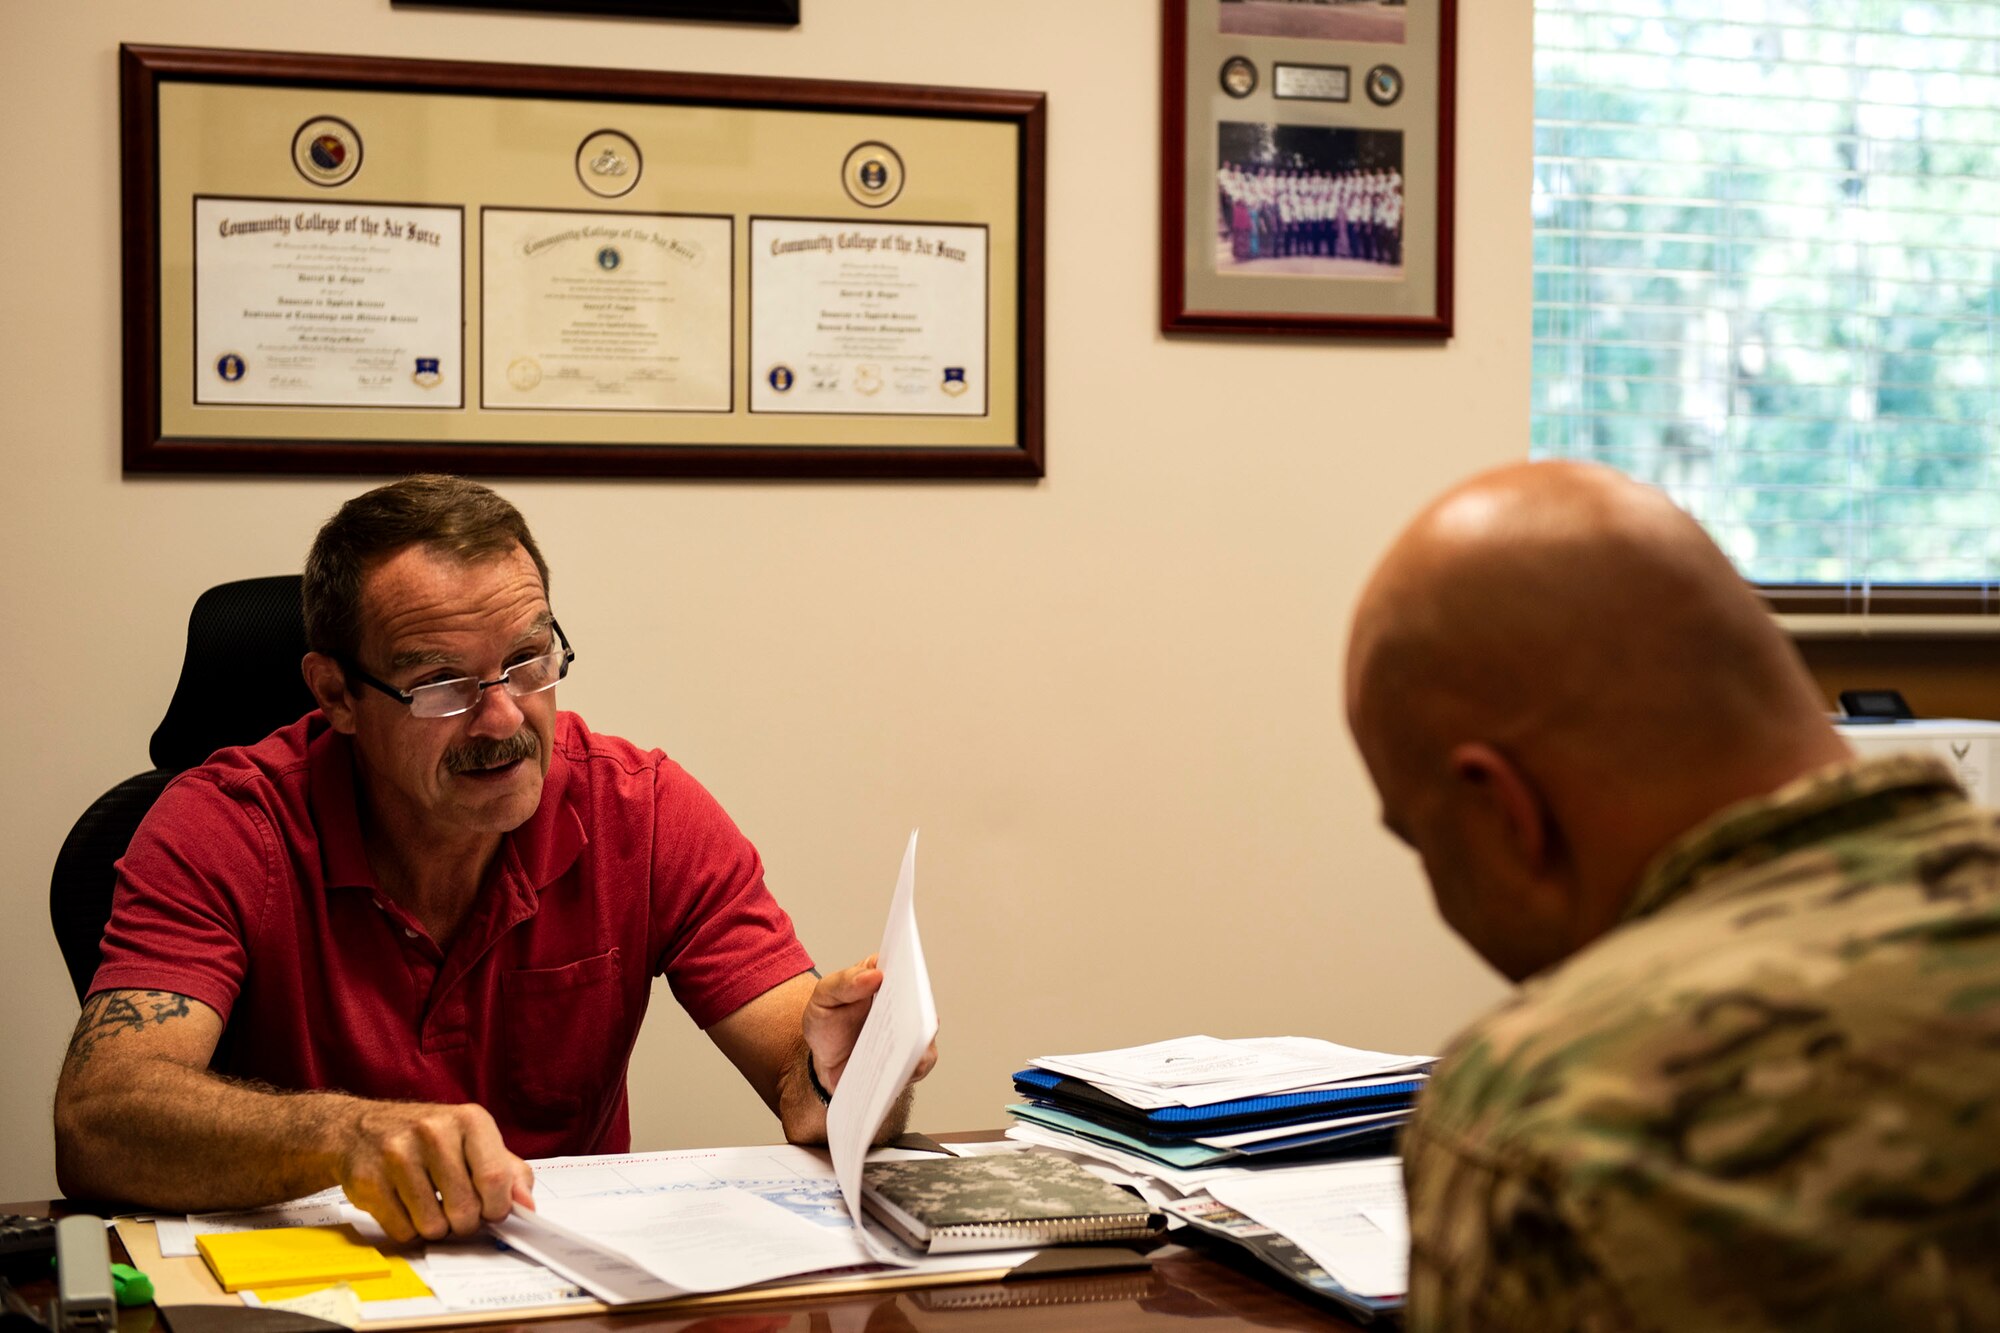 Darryl Gagne, left, 23d Force Support Squadron education specialist, gives advice to Master Sgt. Andrew Blackwell, 23d Civil Engineer Squadron section chief of commander’s support staff, Sept. 5, 2019, at Moody Air Force Base, Ga. The education center at the Information Learning Center equips Airmen with the tools they need to further their education, be it finishing their Community College of the Air Force degree or continuing higher education. (U.S. Air Force photo by Senior Airman Erick Requadt)